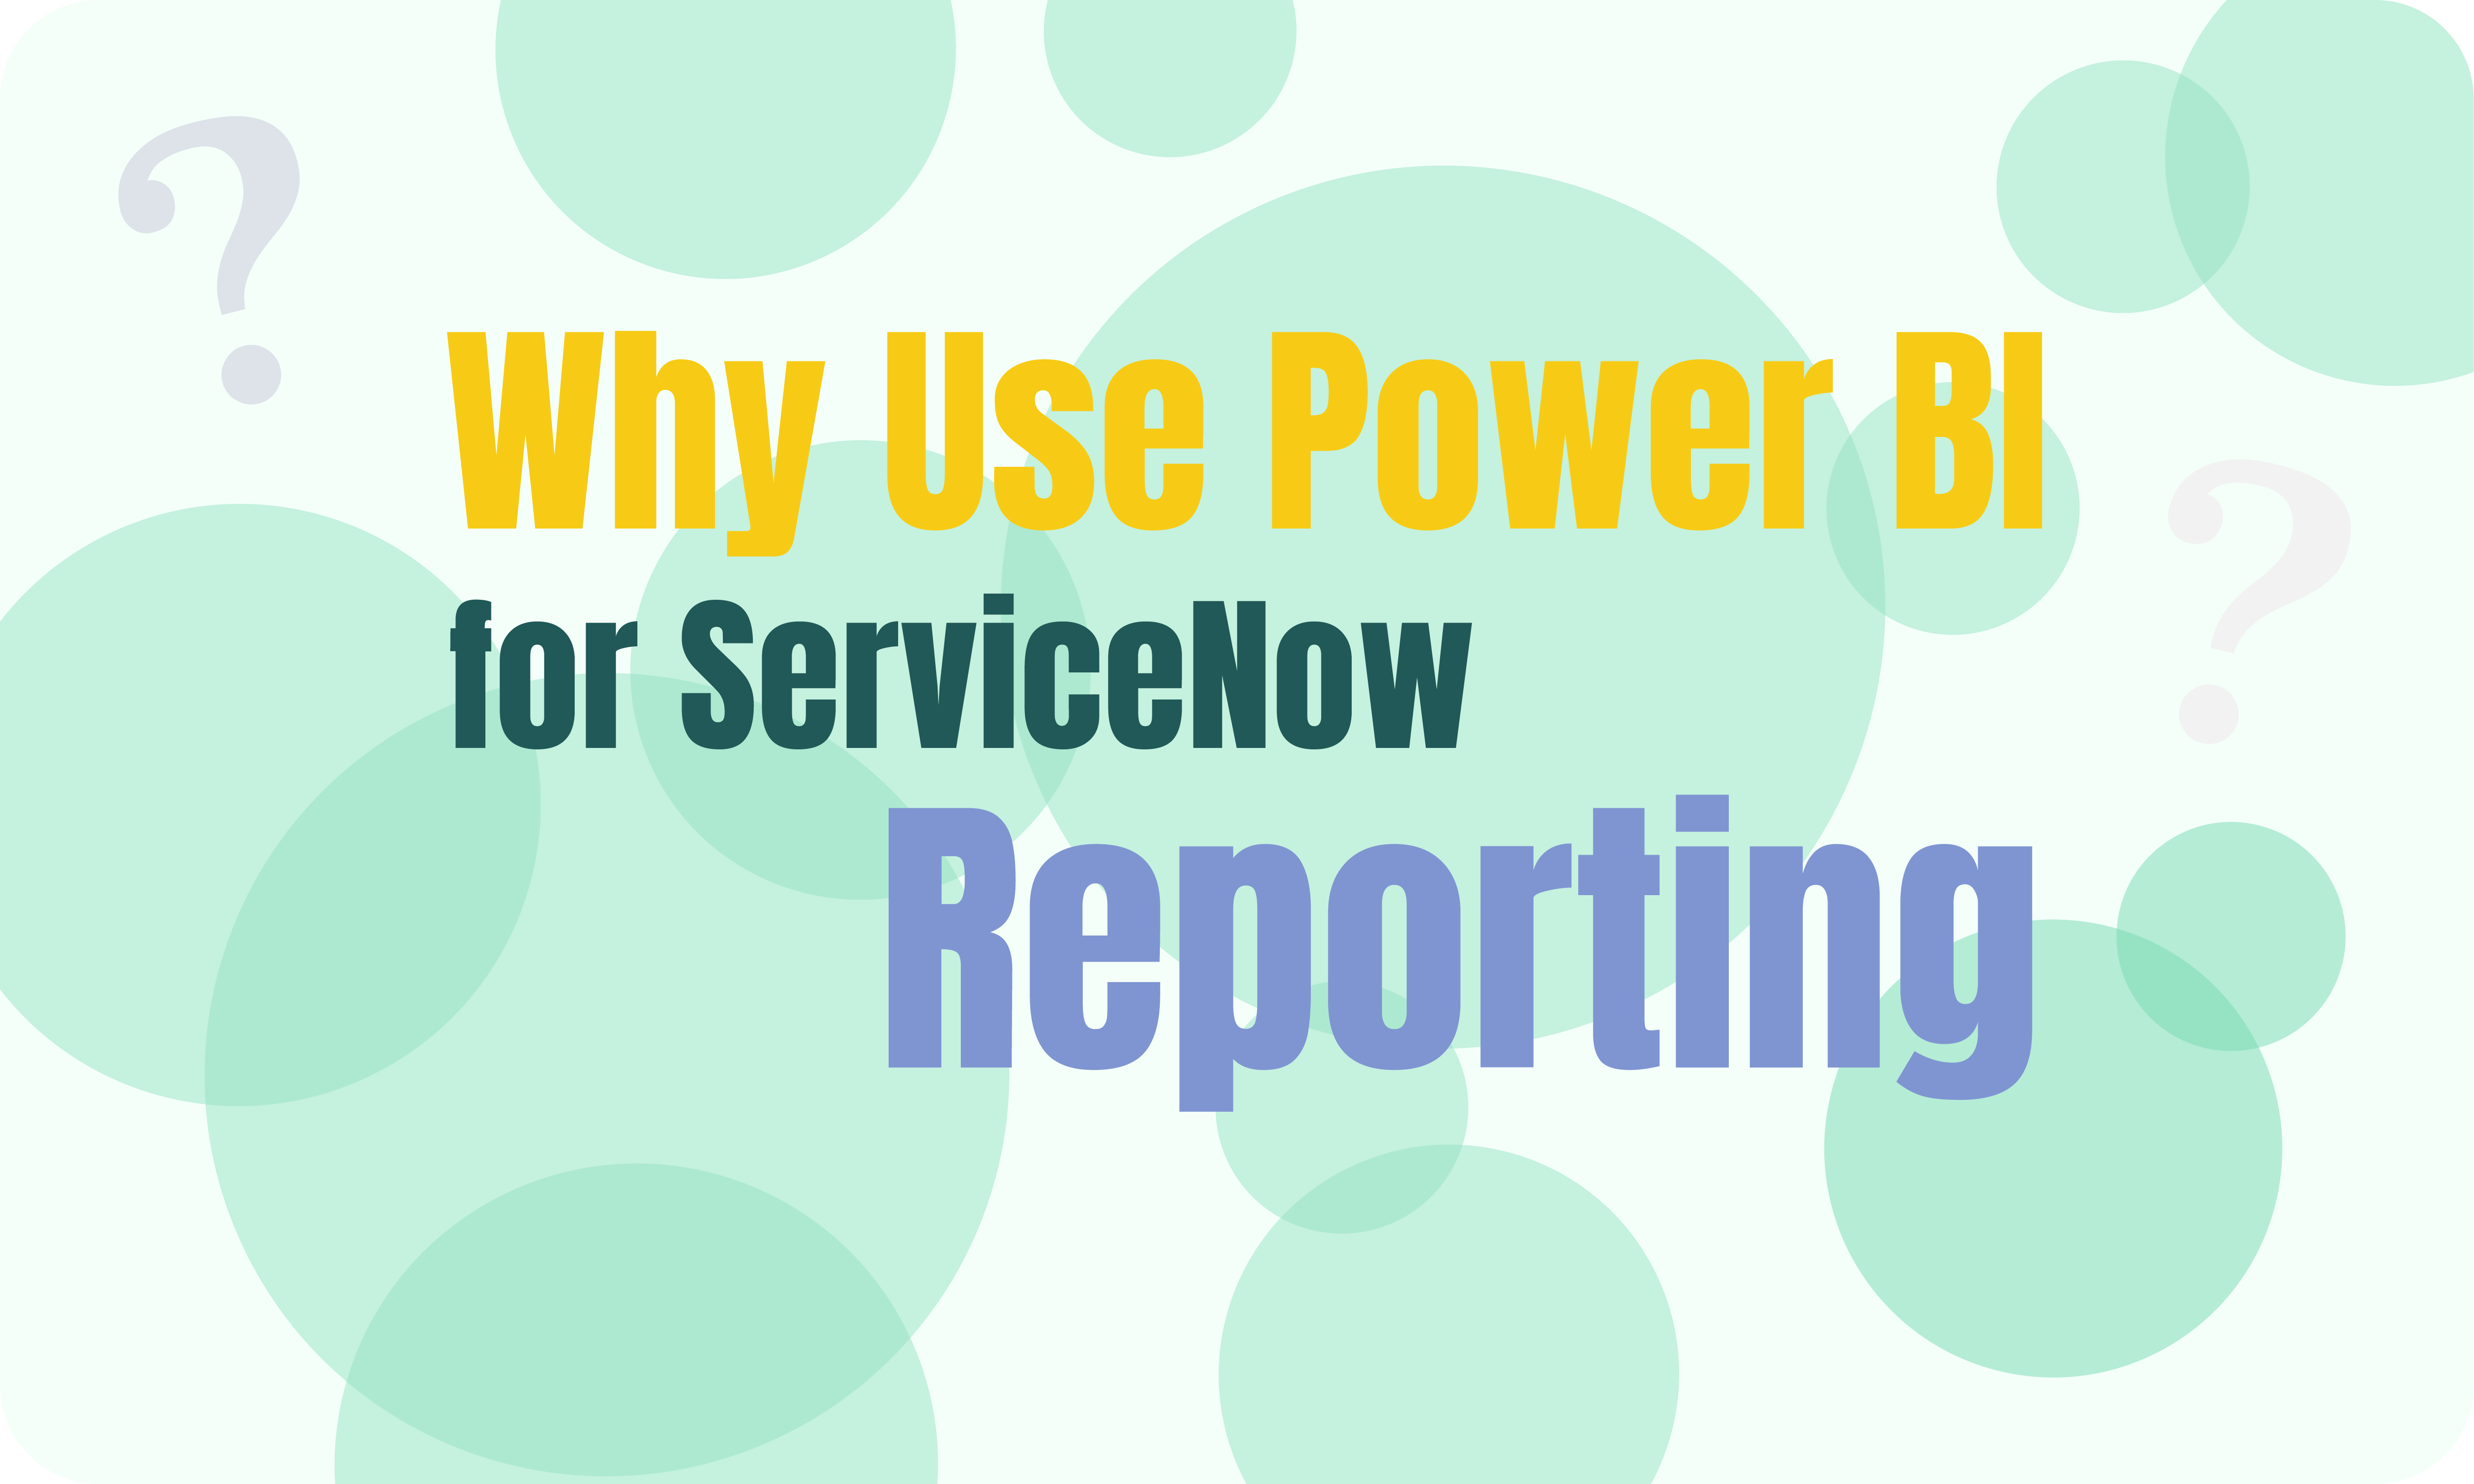 Why Choose Power BI for Advanced ServiceNow Reporting